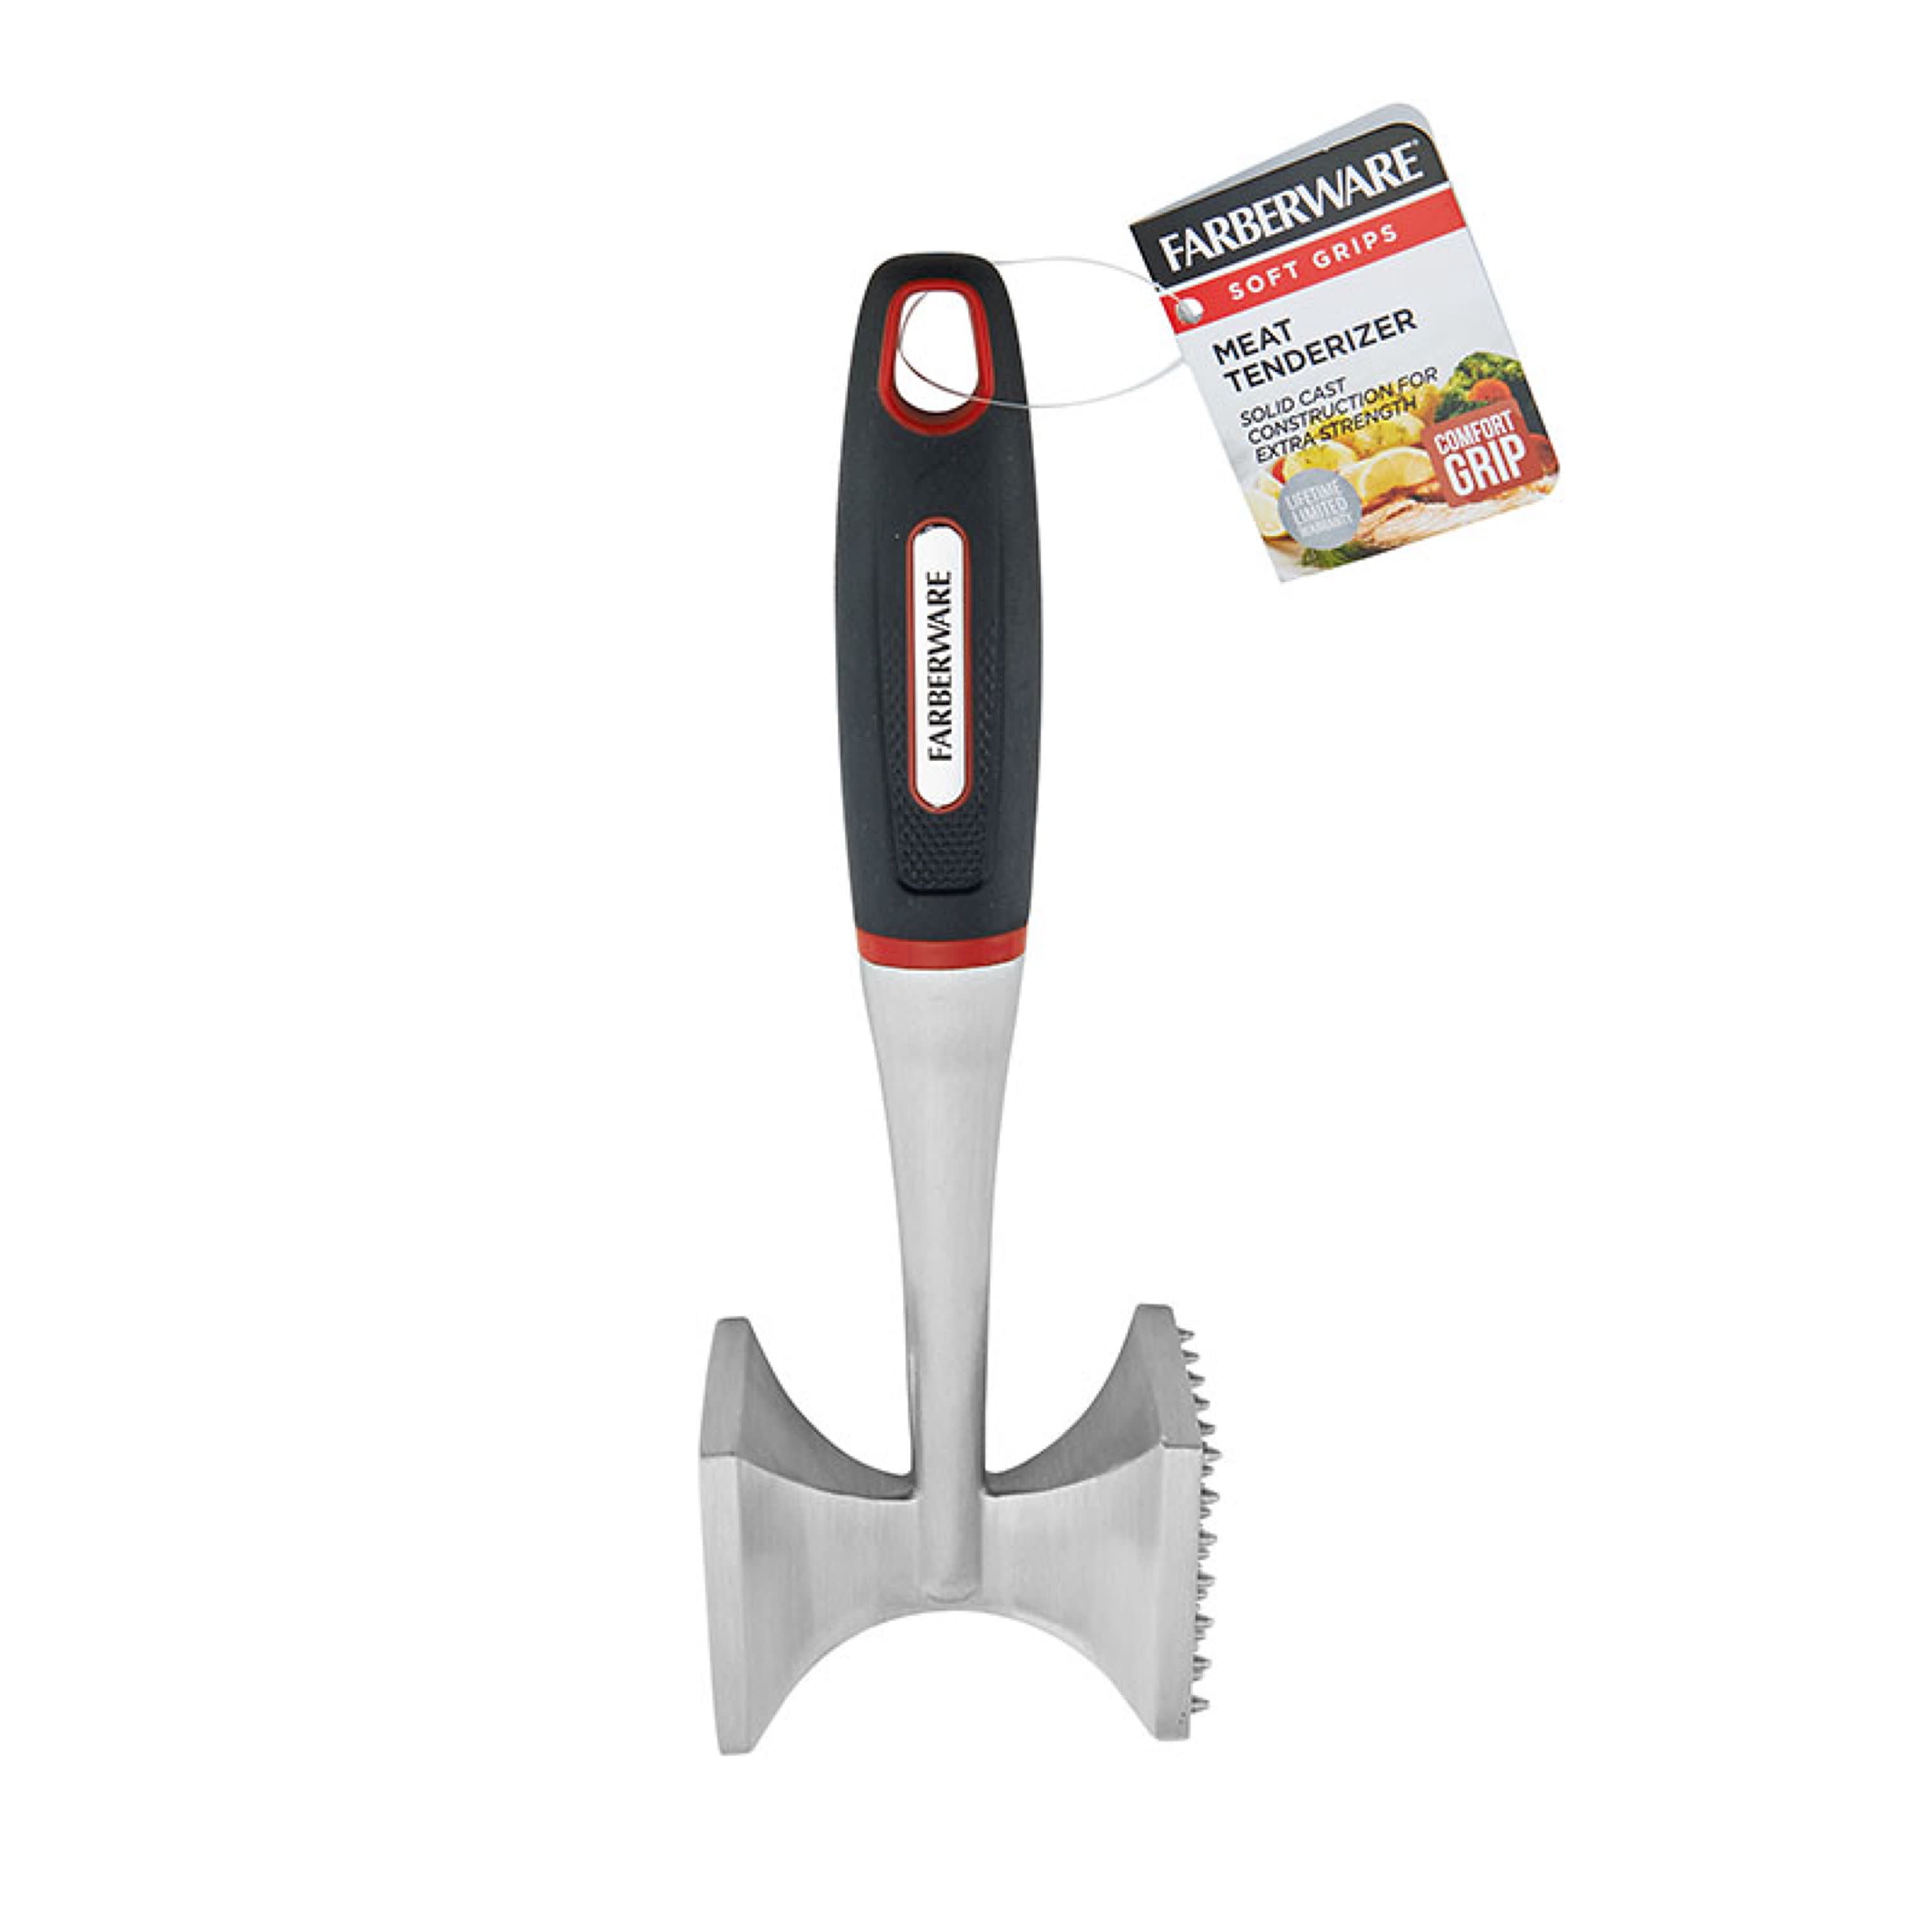 Grip-Ez Meat Tenderizer - The Red Willow